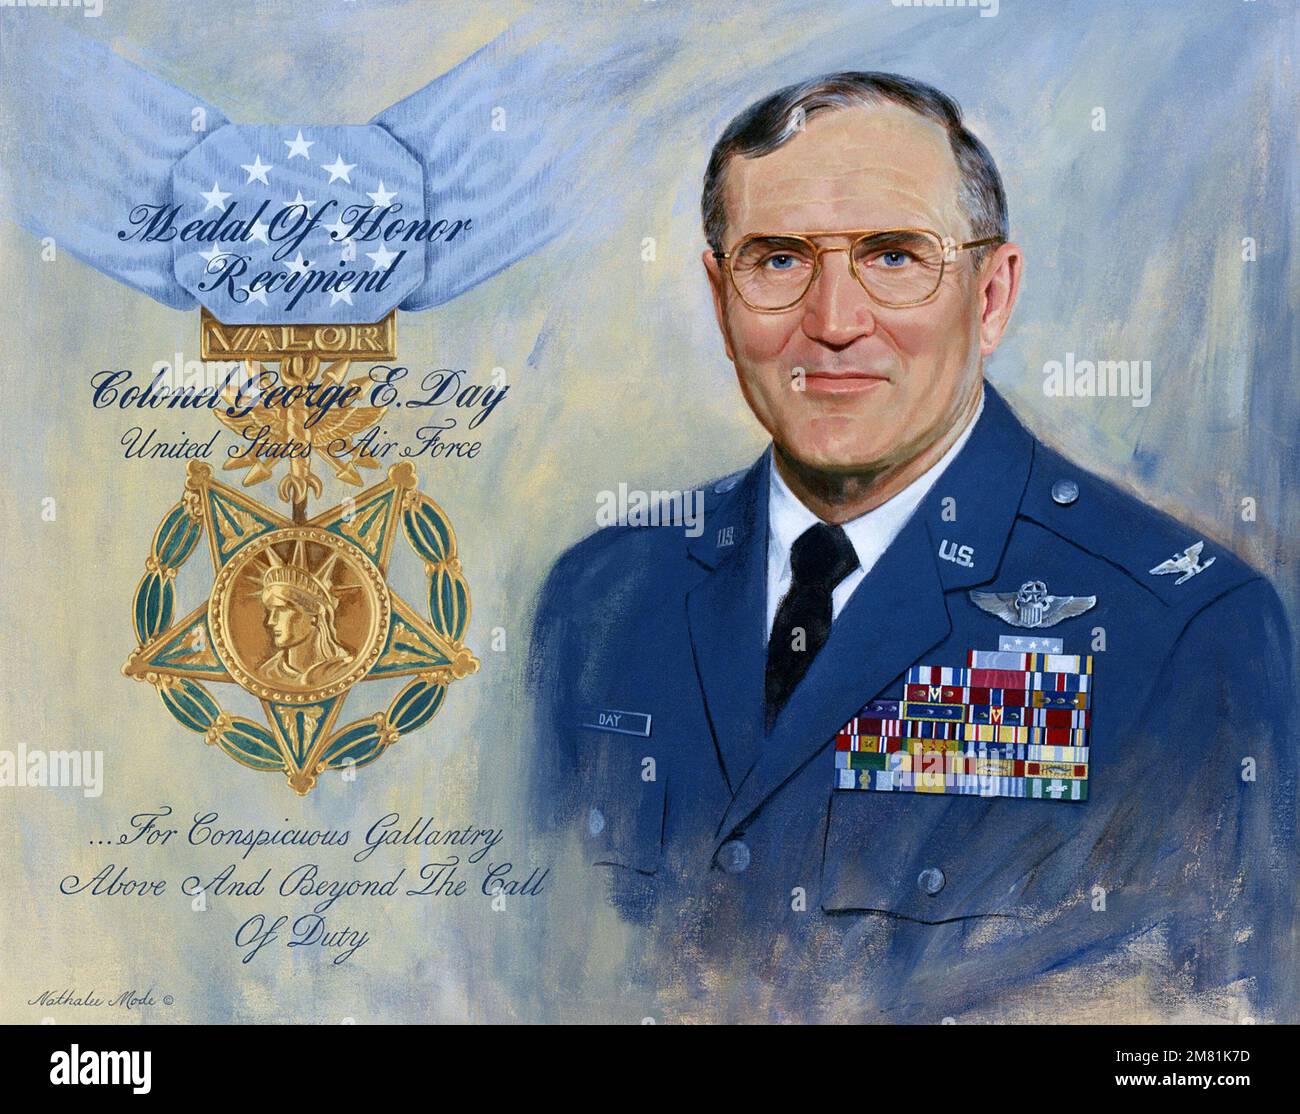 Artwork: 'Medal of Honor Recipient Colonel George E. Day' Artist: Nathalee Mode, US Air Force Air Collection. Country: Unknown Stock Photo